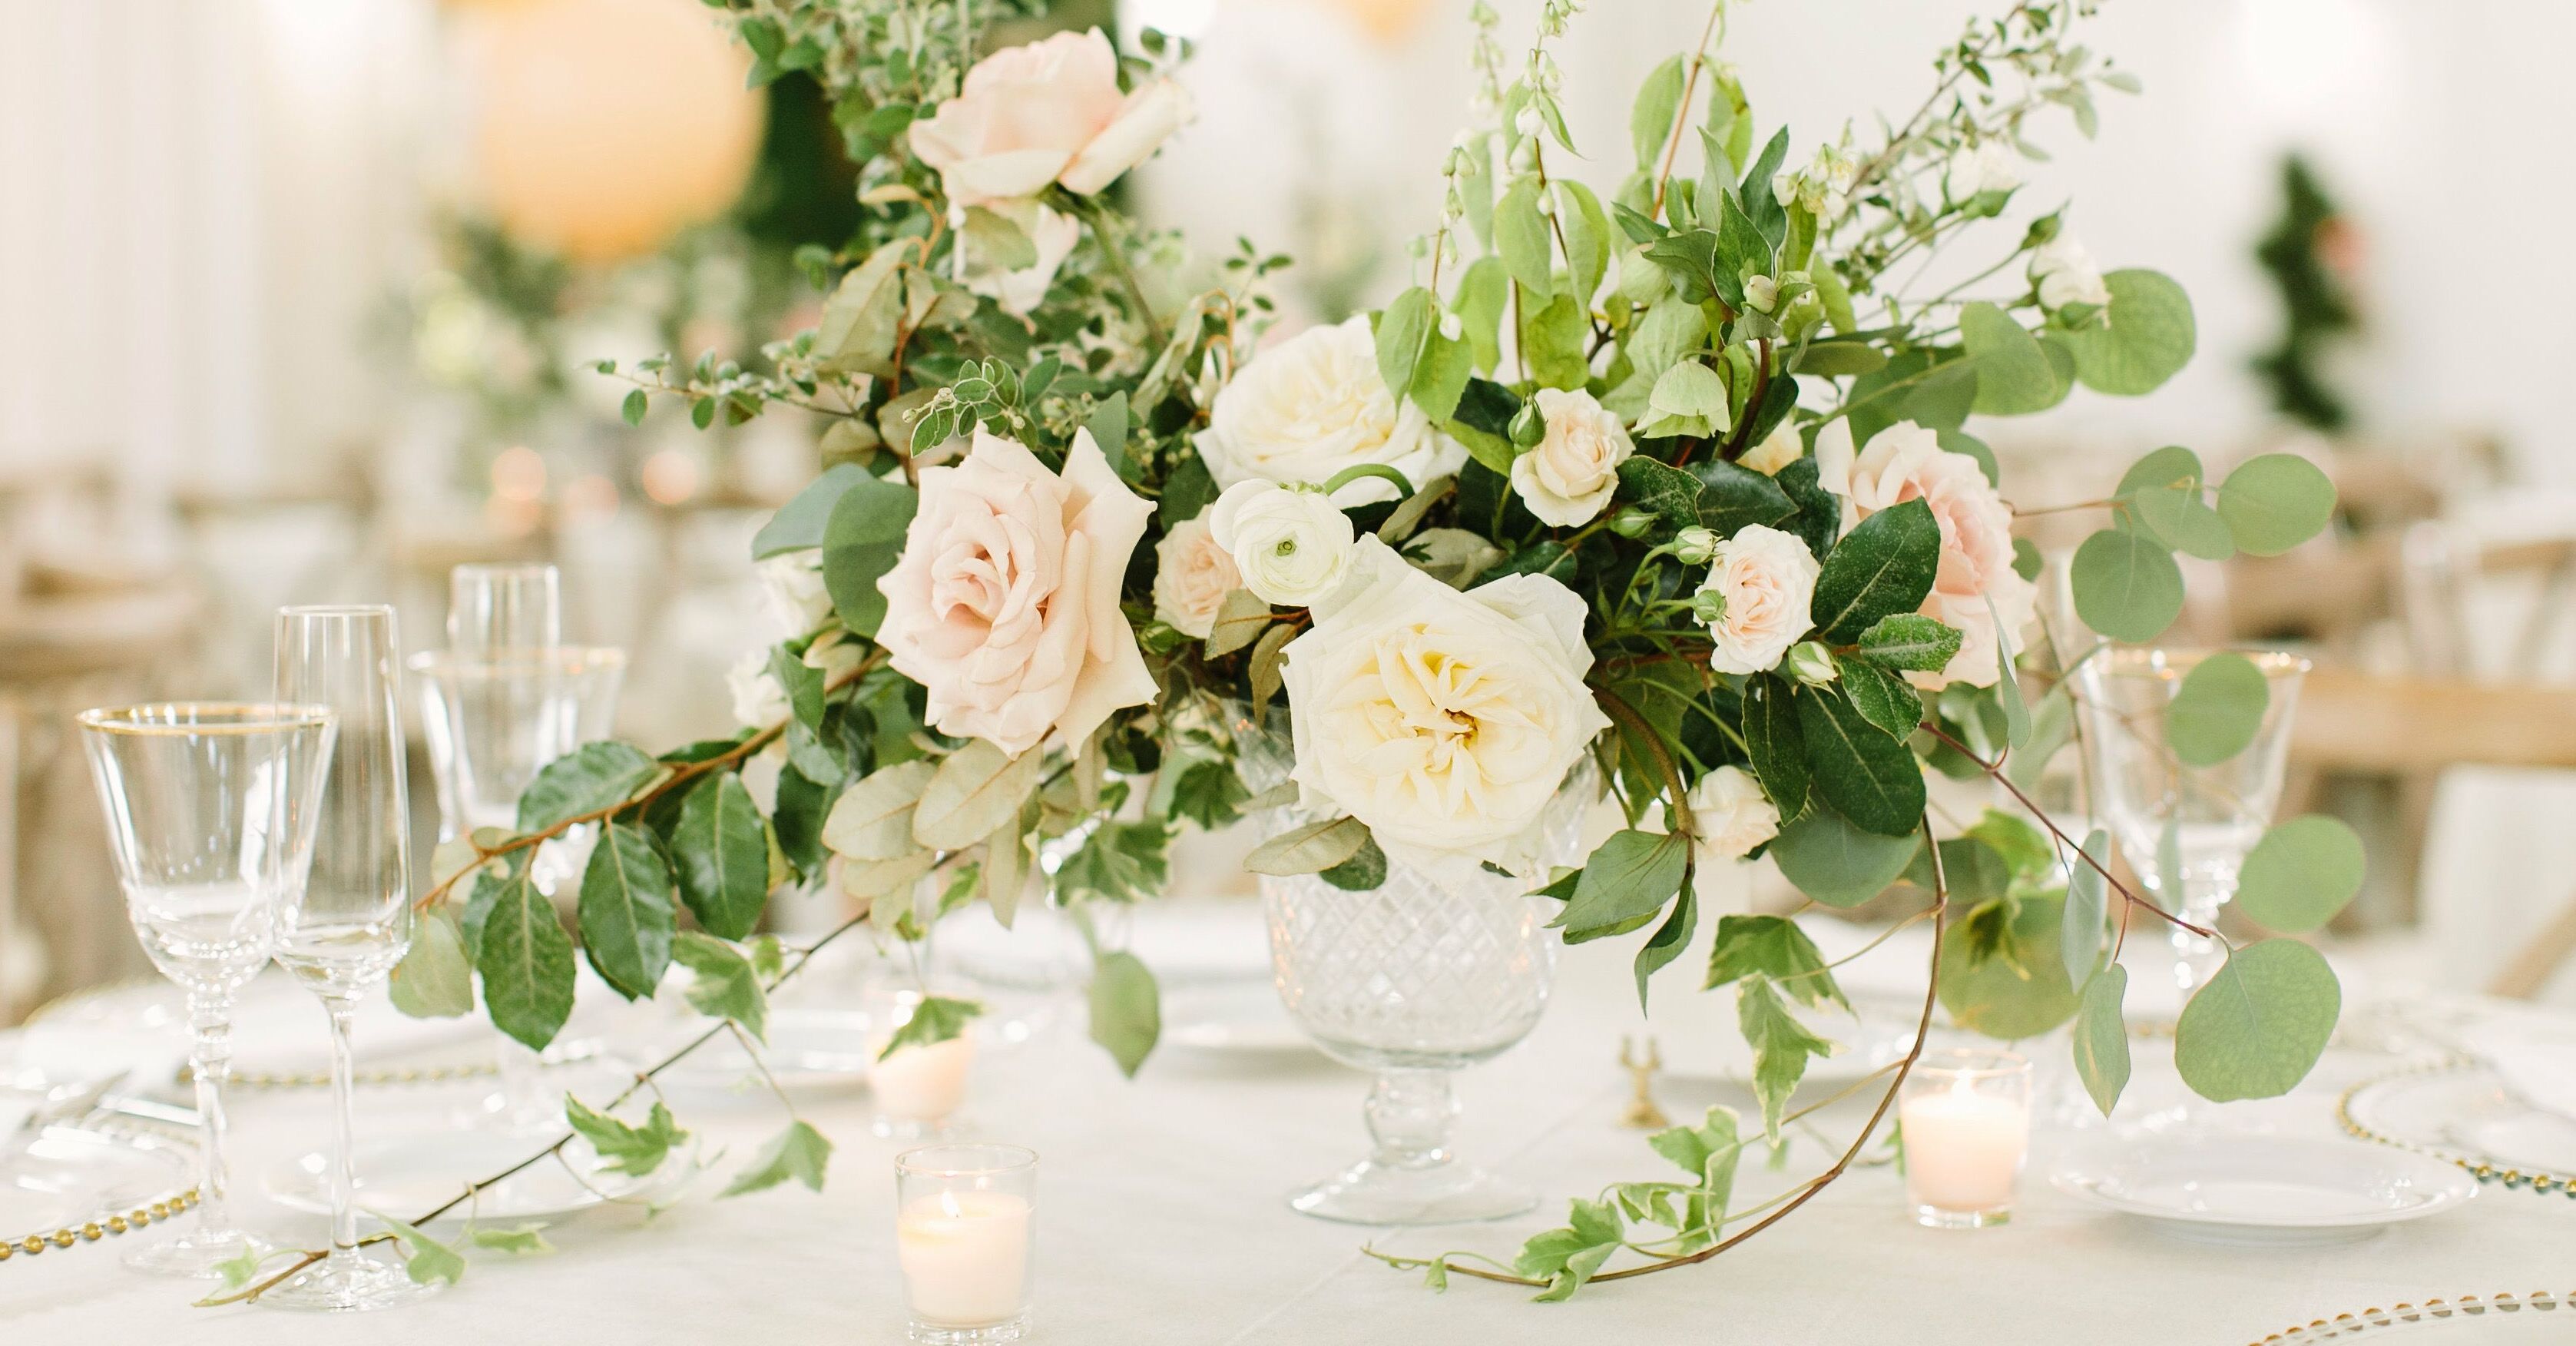 30 Greenery Centerpieces to Decorate Your Wedding Tabletops